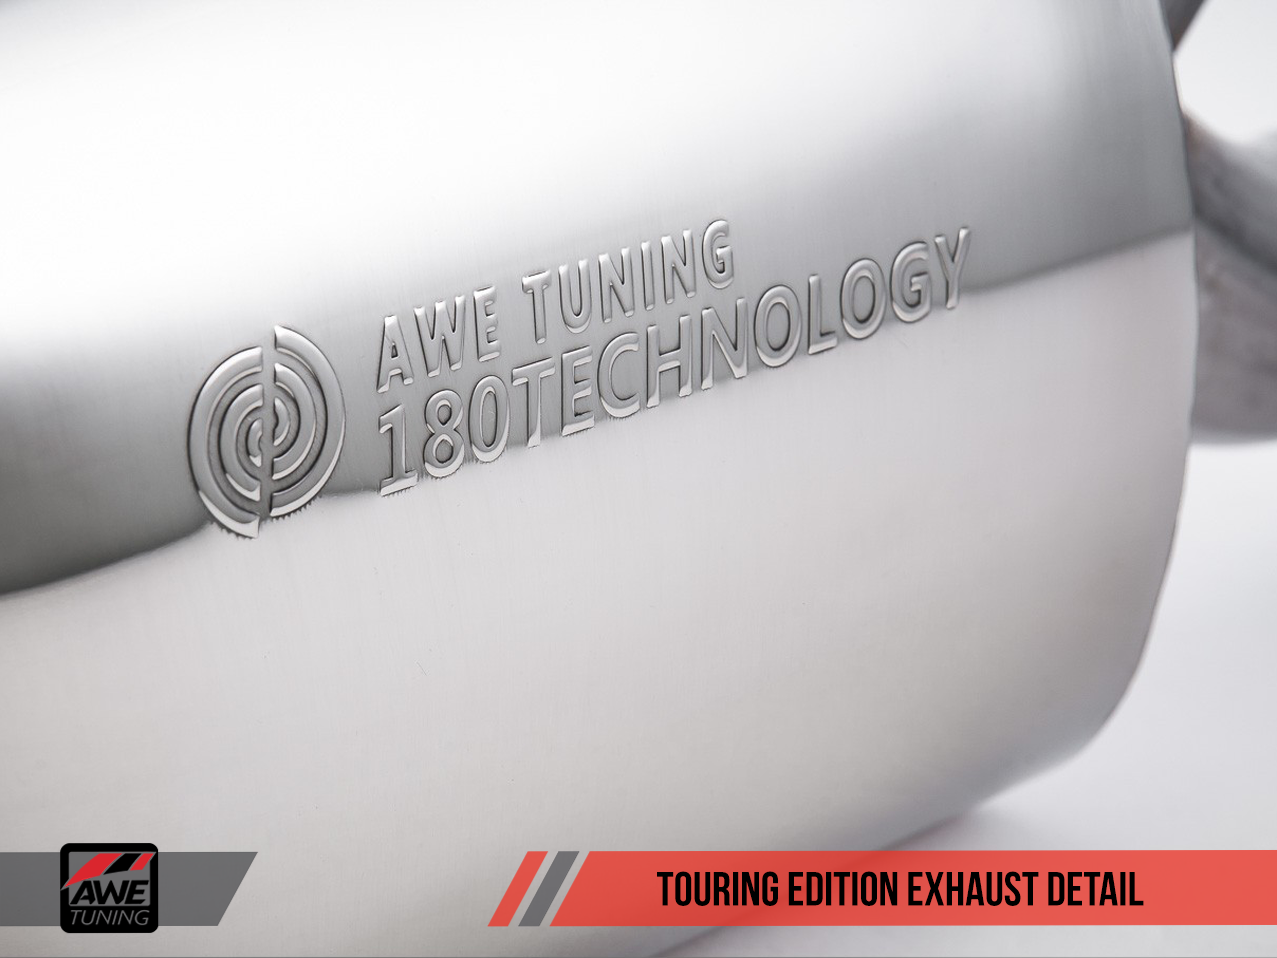 AWE Touring Edition Exhaust for Audi C7 S7 4.0T - Polished Silver Tips